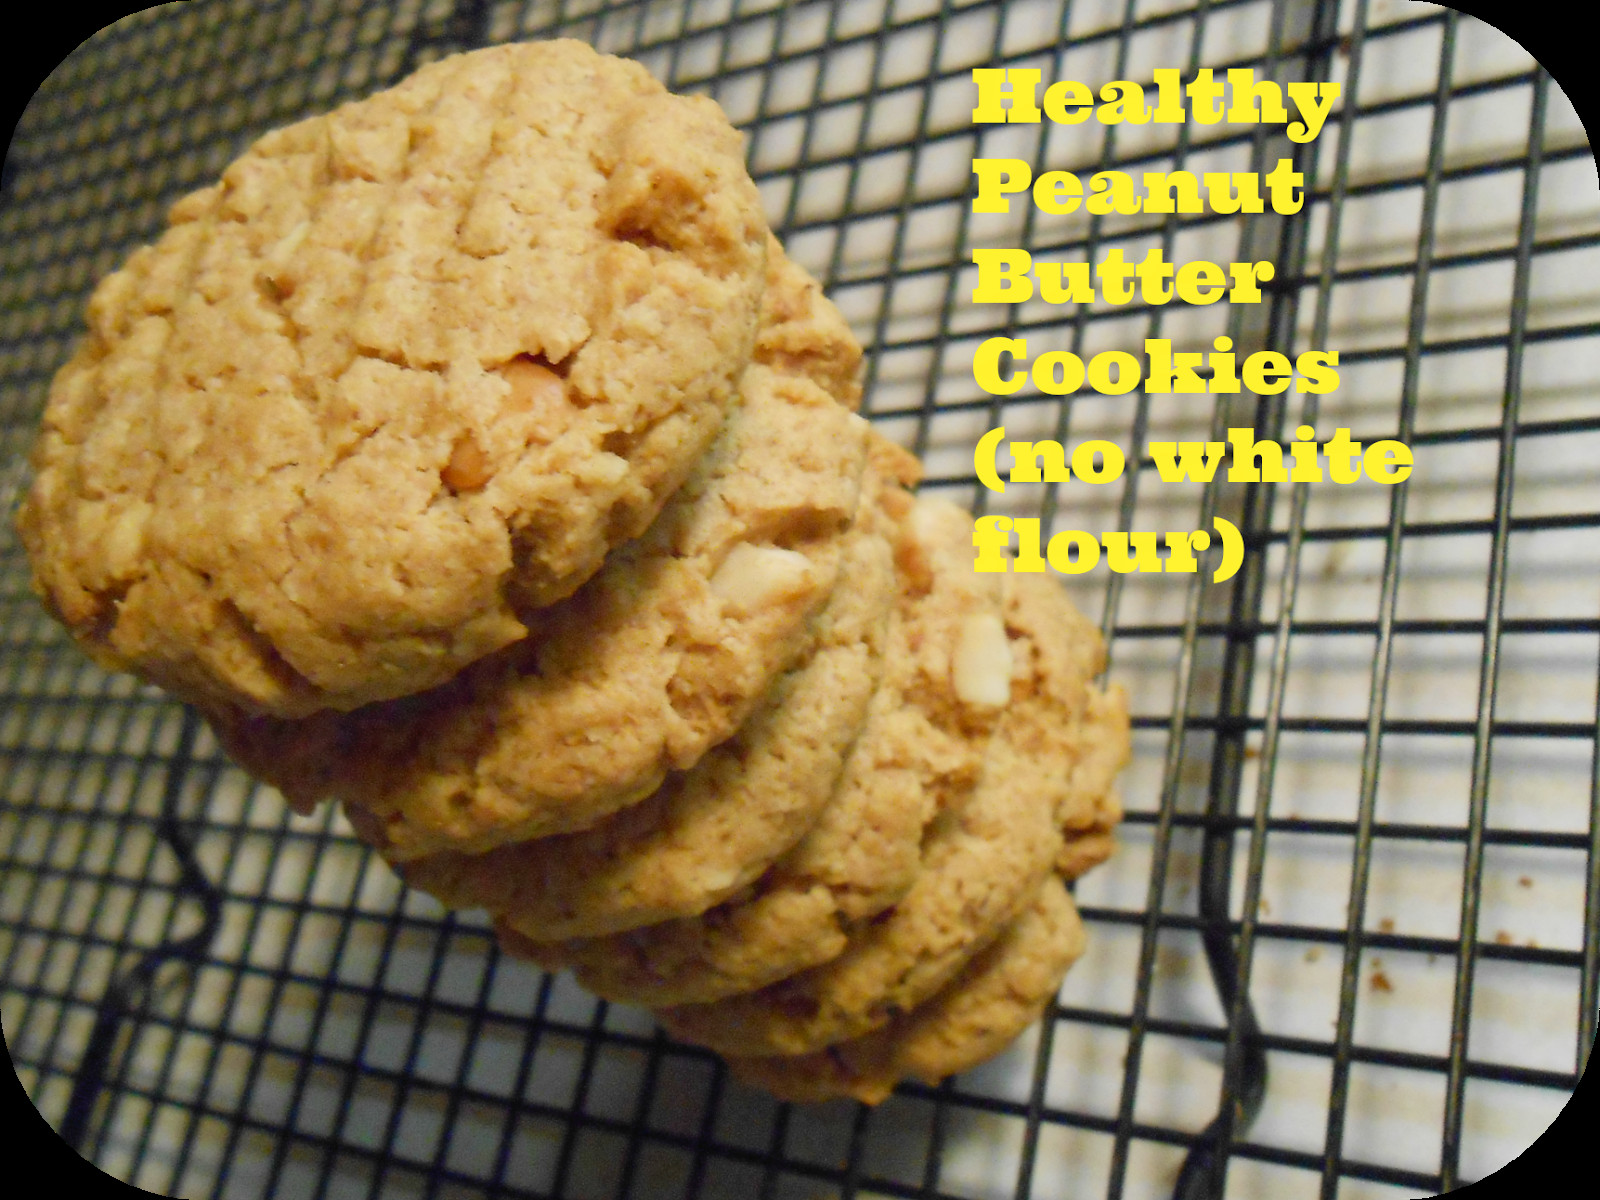 Healthy Peanut Butter Cookies No Sugar
 The Better Baker Healthy Peanut Butter Cookies no